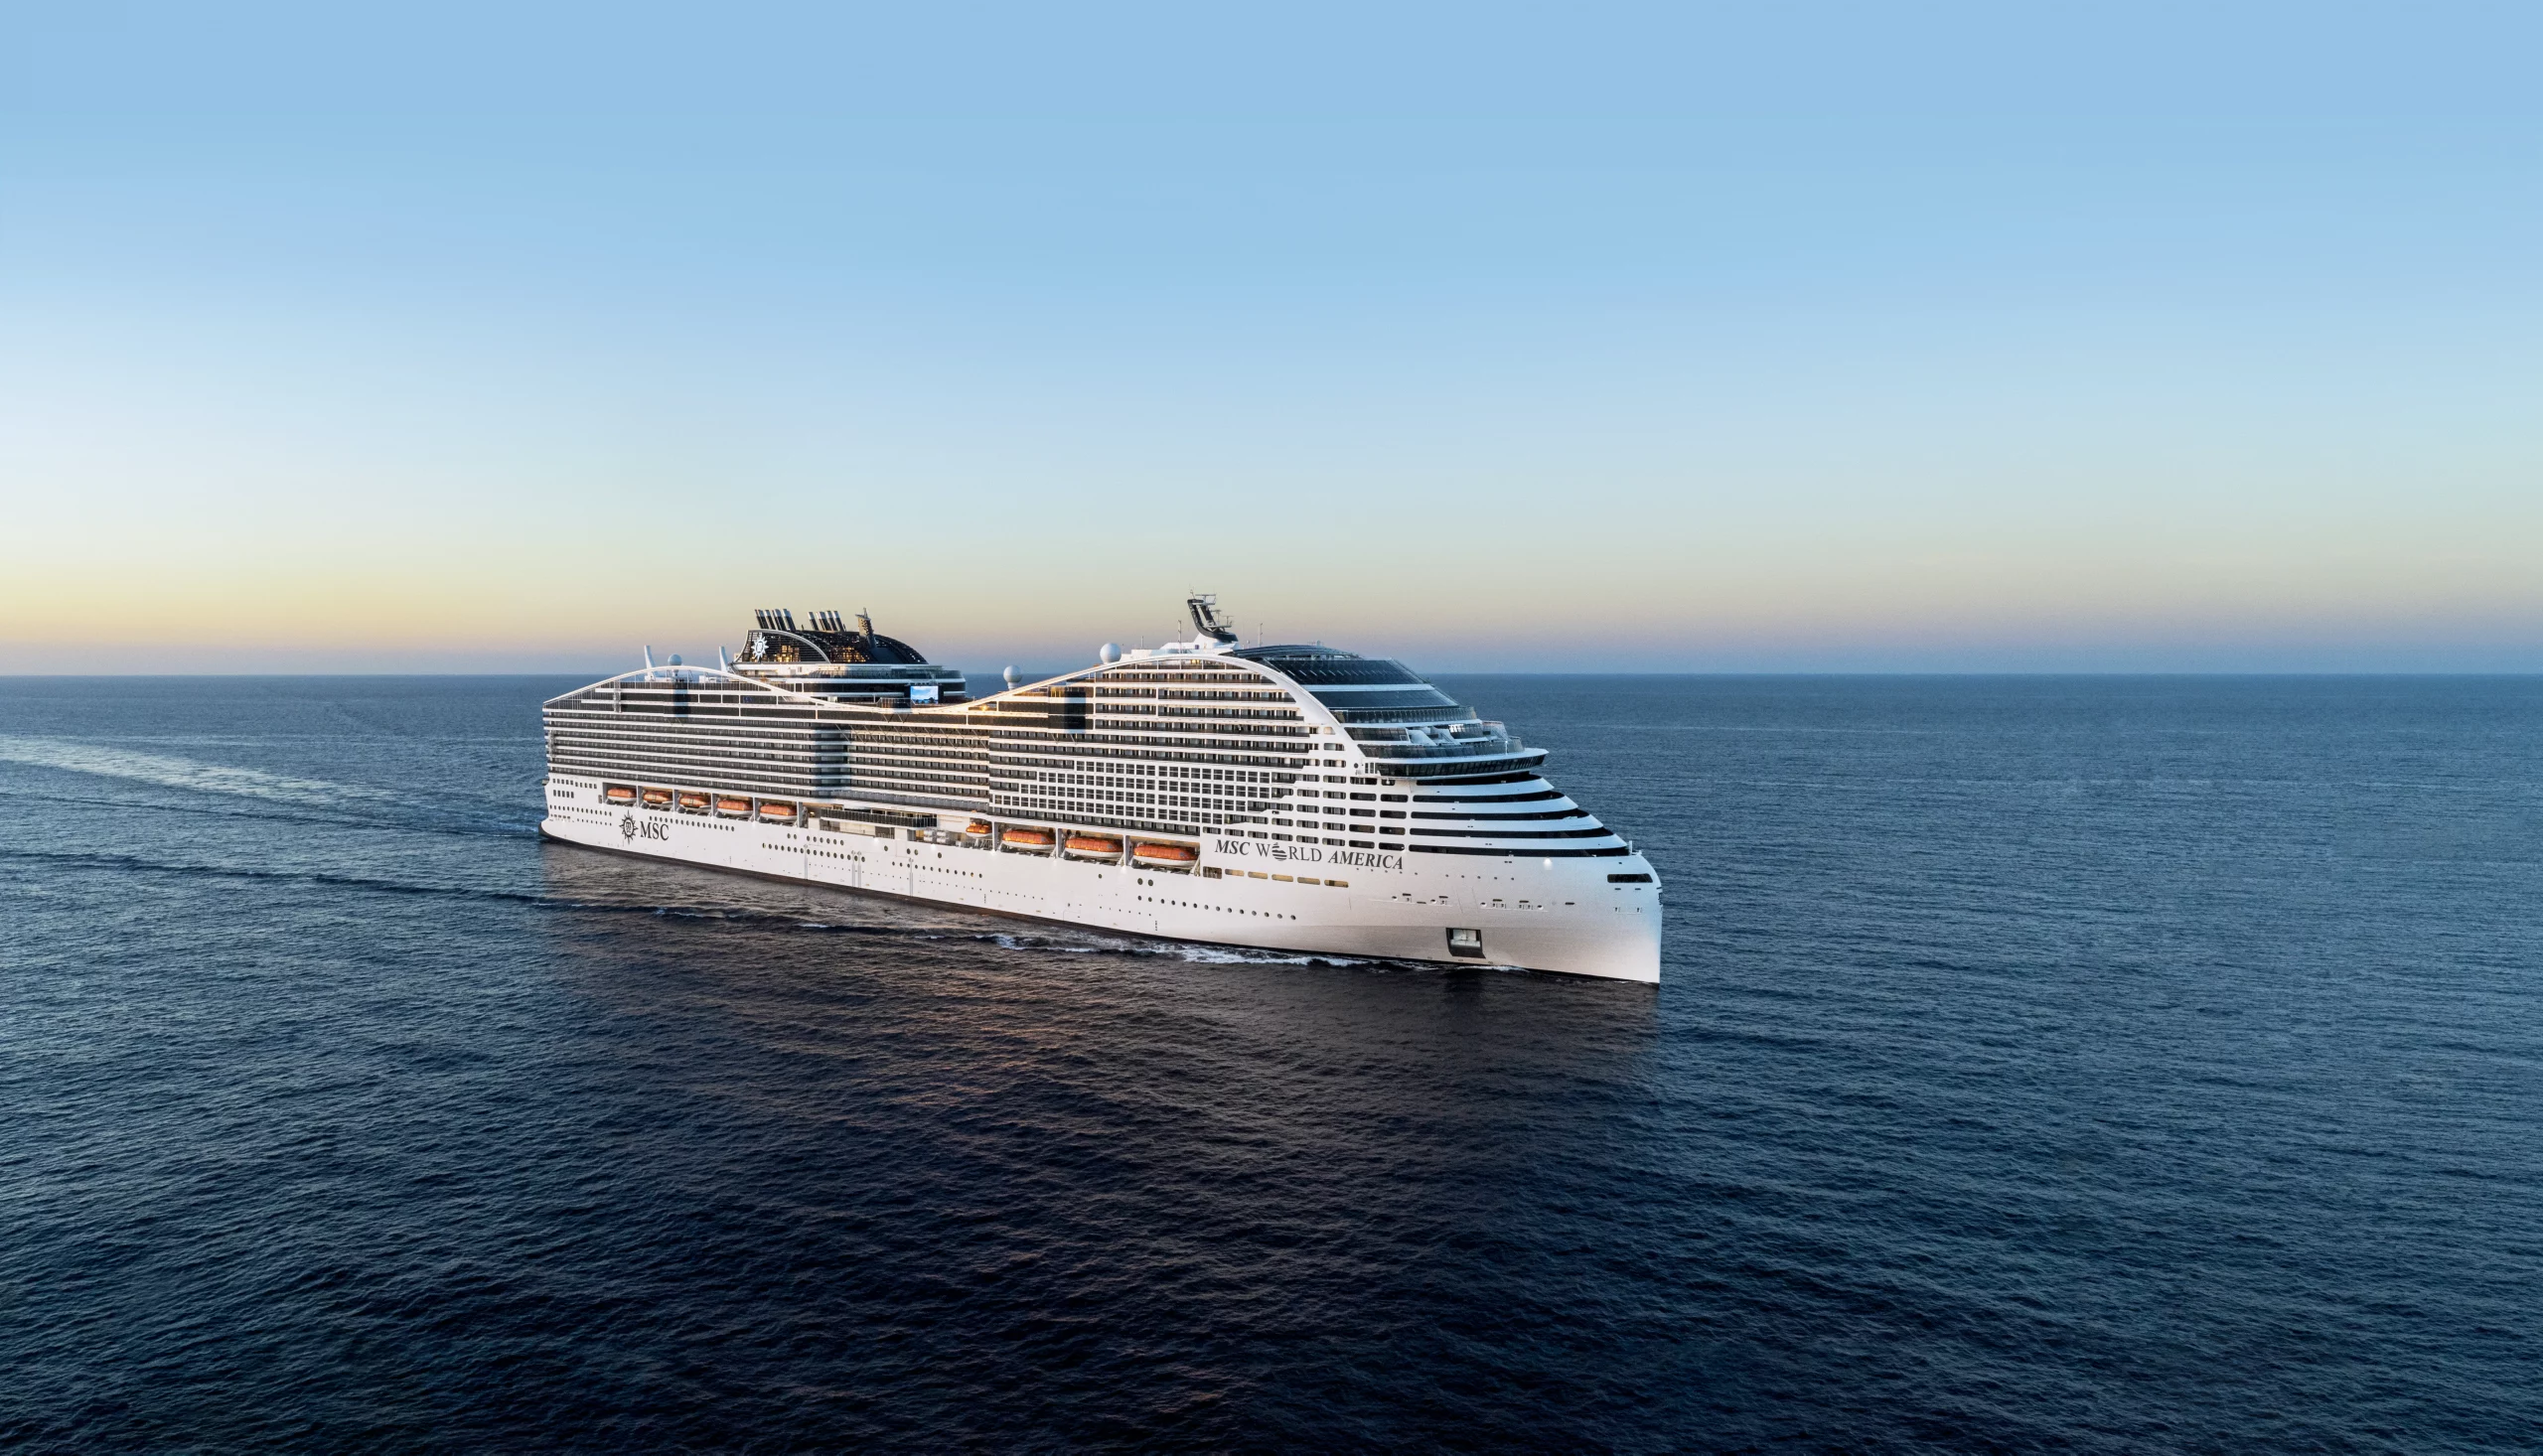 MSC Cruises Confirms Orders with Chantiers De L’Atlantique for Two New Environmentally Advanced World Class Ships